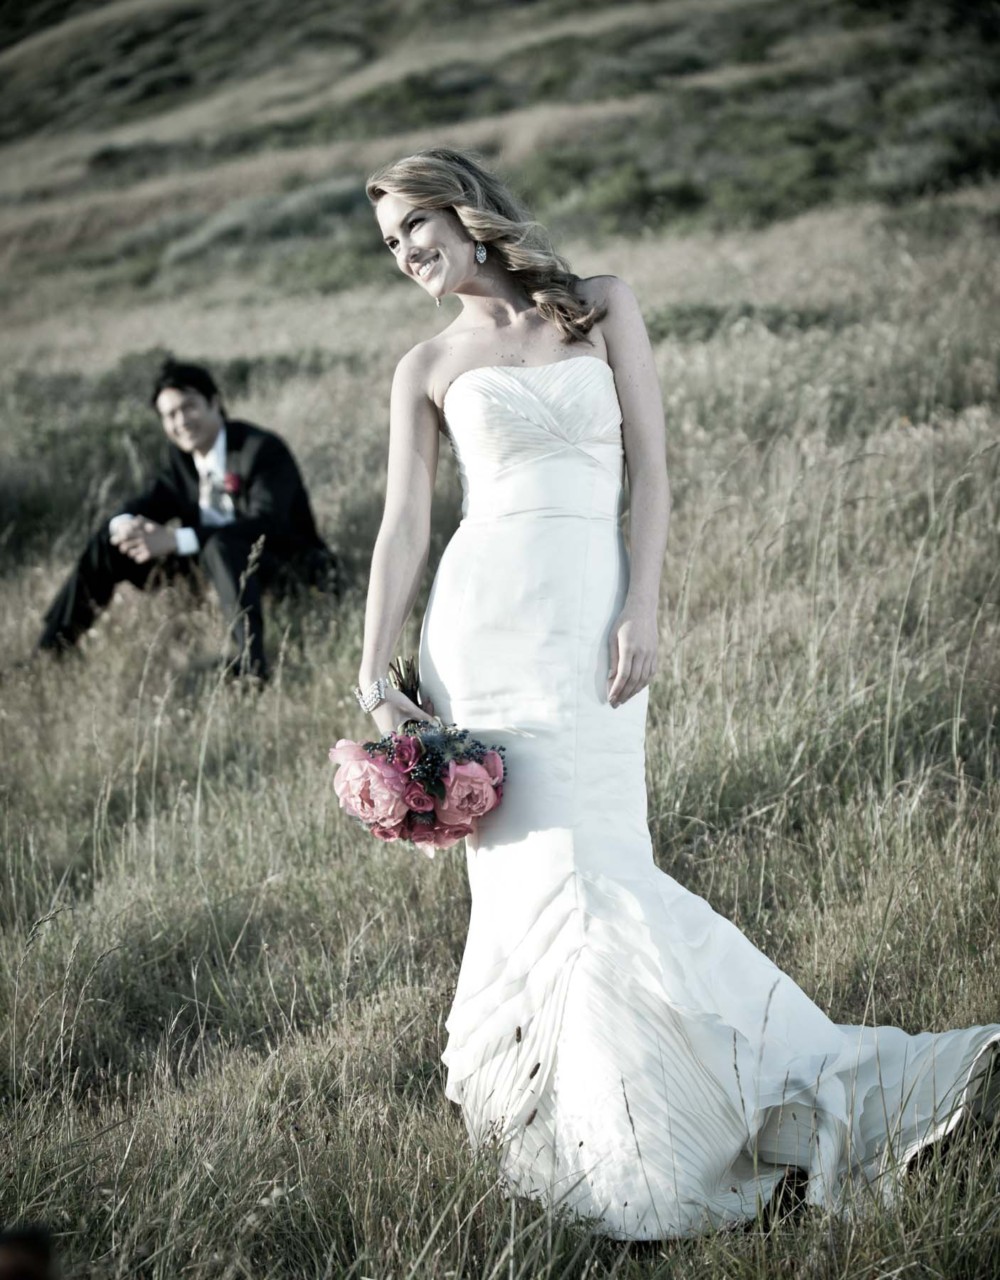 Looking for a spring wedding photographer in Chugiak?